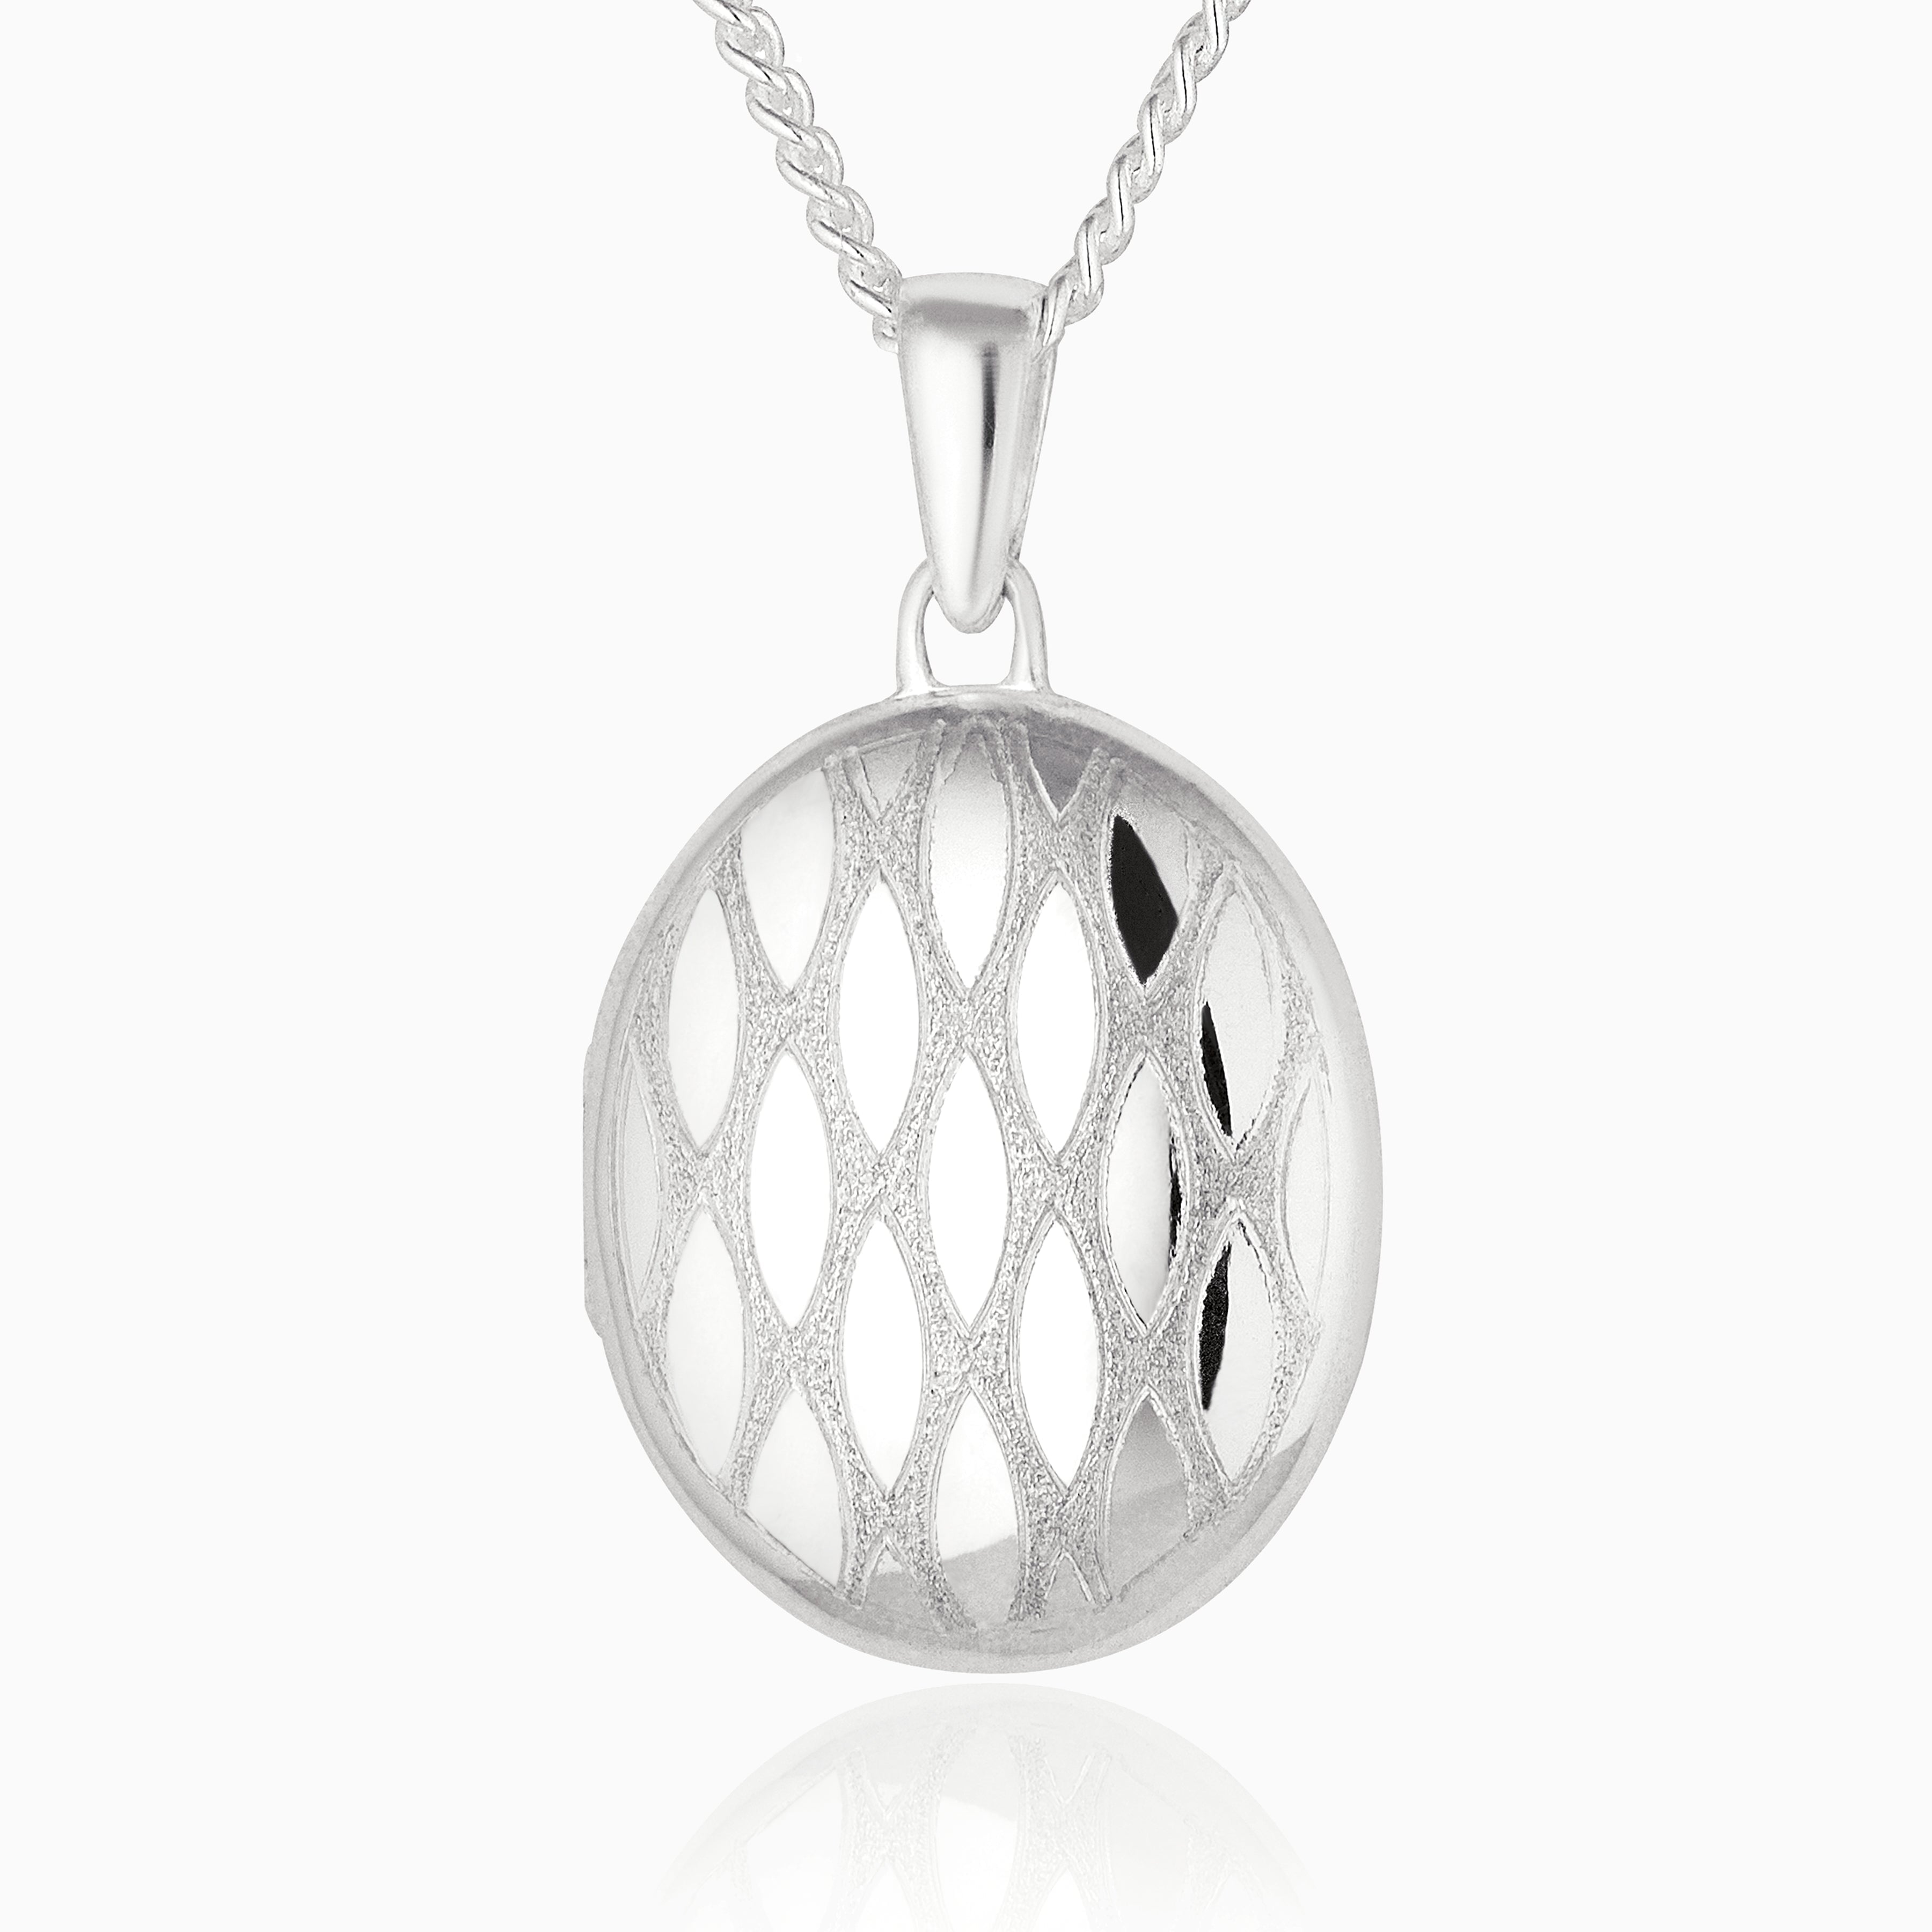 Product title: Silver Trellis Locket, product type: 